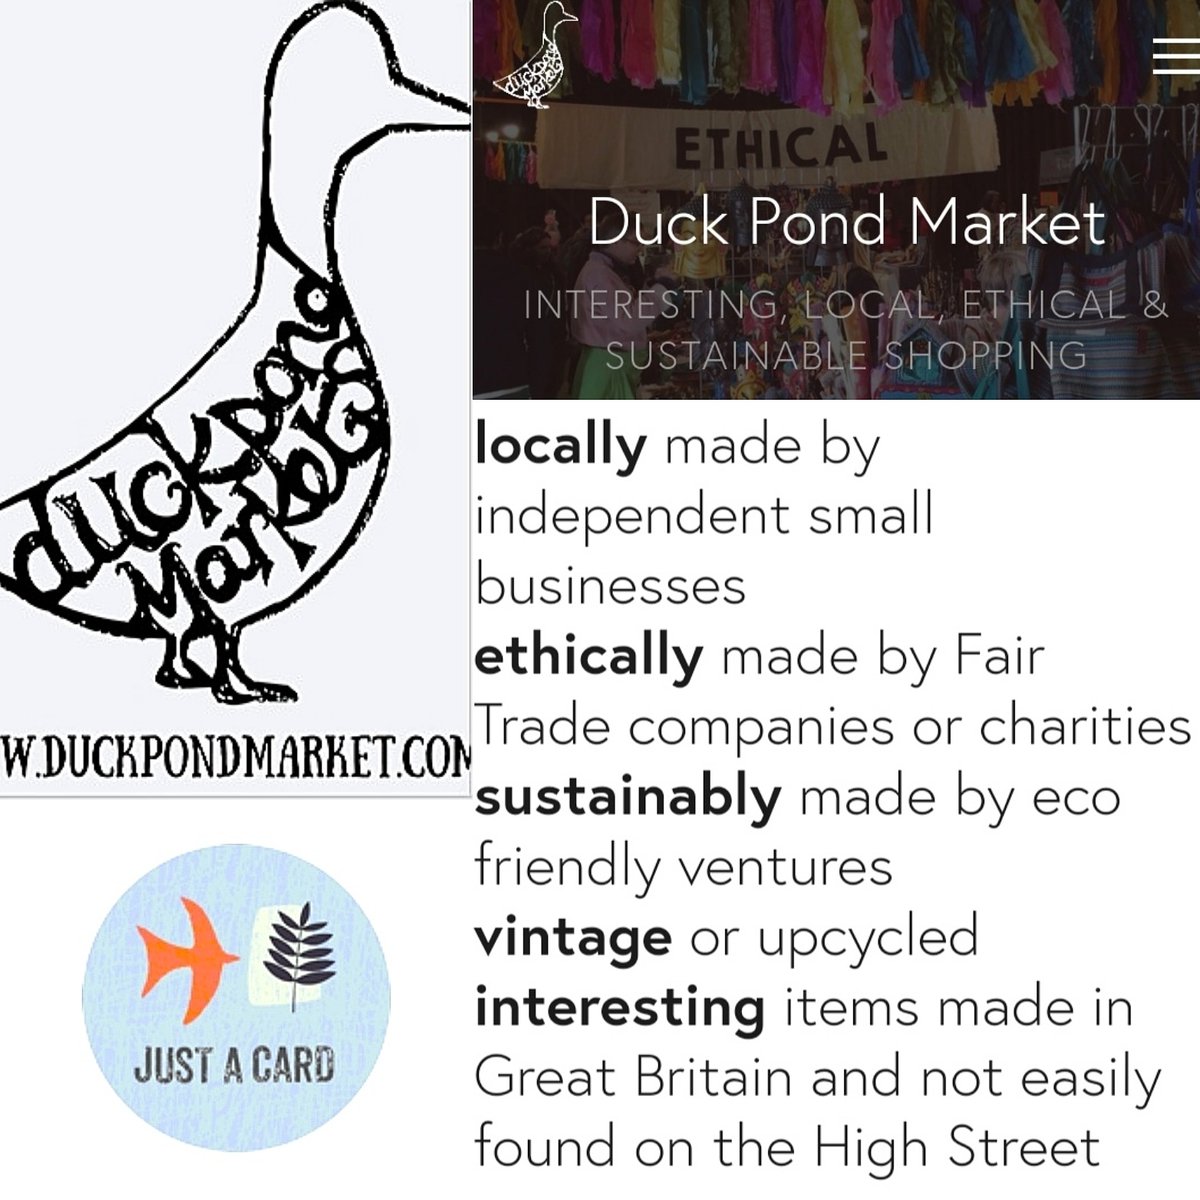 My #onlineartclasses are #advertised on the wonderful @duckpondmarket website among other #smallbusinesses specialising in sustainably made #ethicalproducts & services. They are also part of the great @Justacard1 campaign! Website: duckpondmarket.com  #supportsmallbusinesses